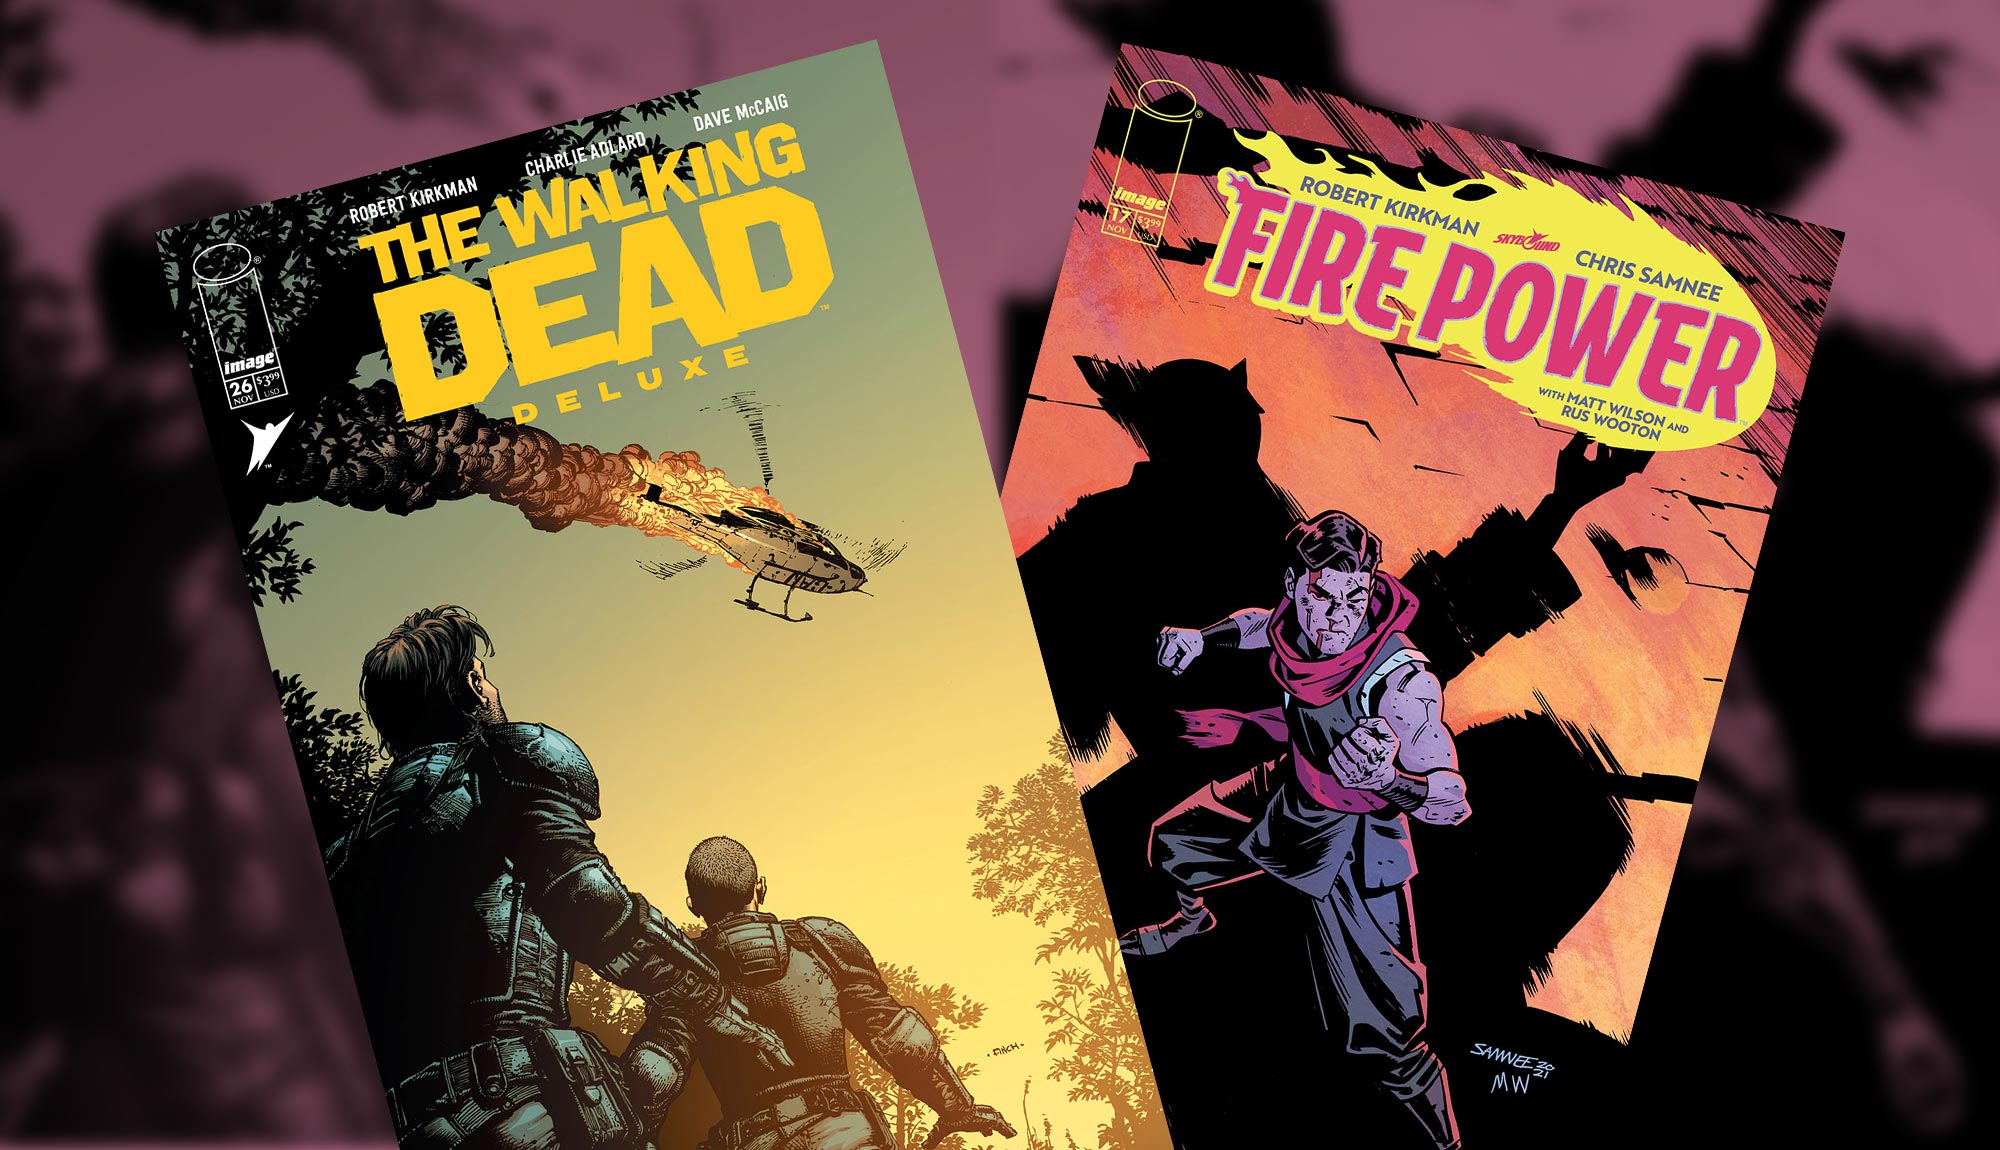 THIS WEEK’S COMICS: FIRE POWER #17, THE WALKING DEAD DELUXE #26